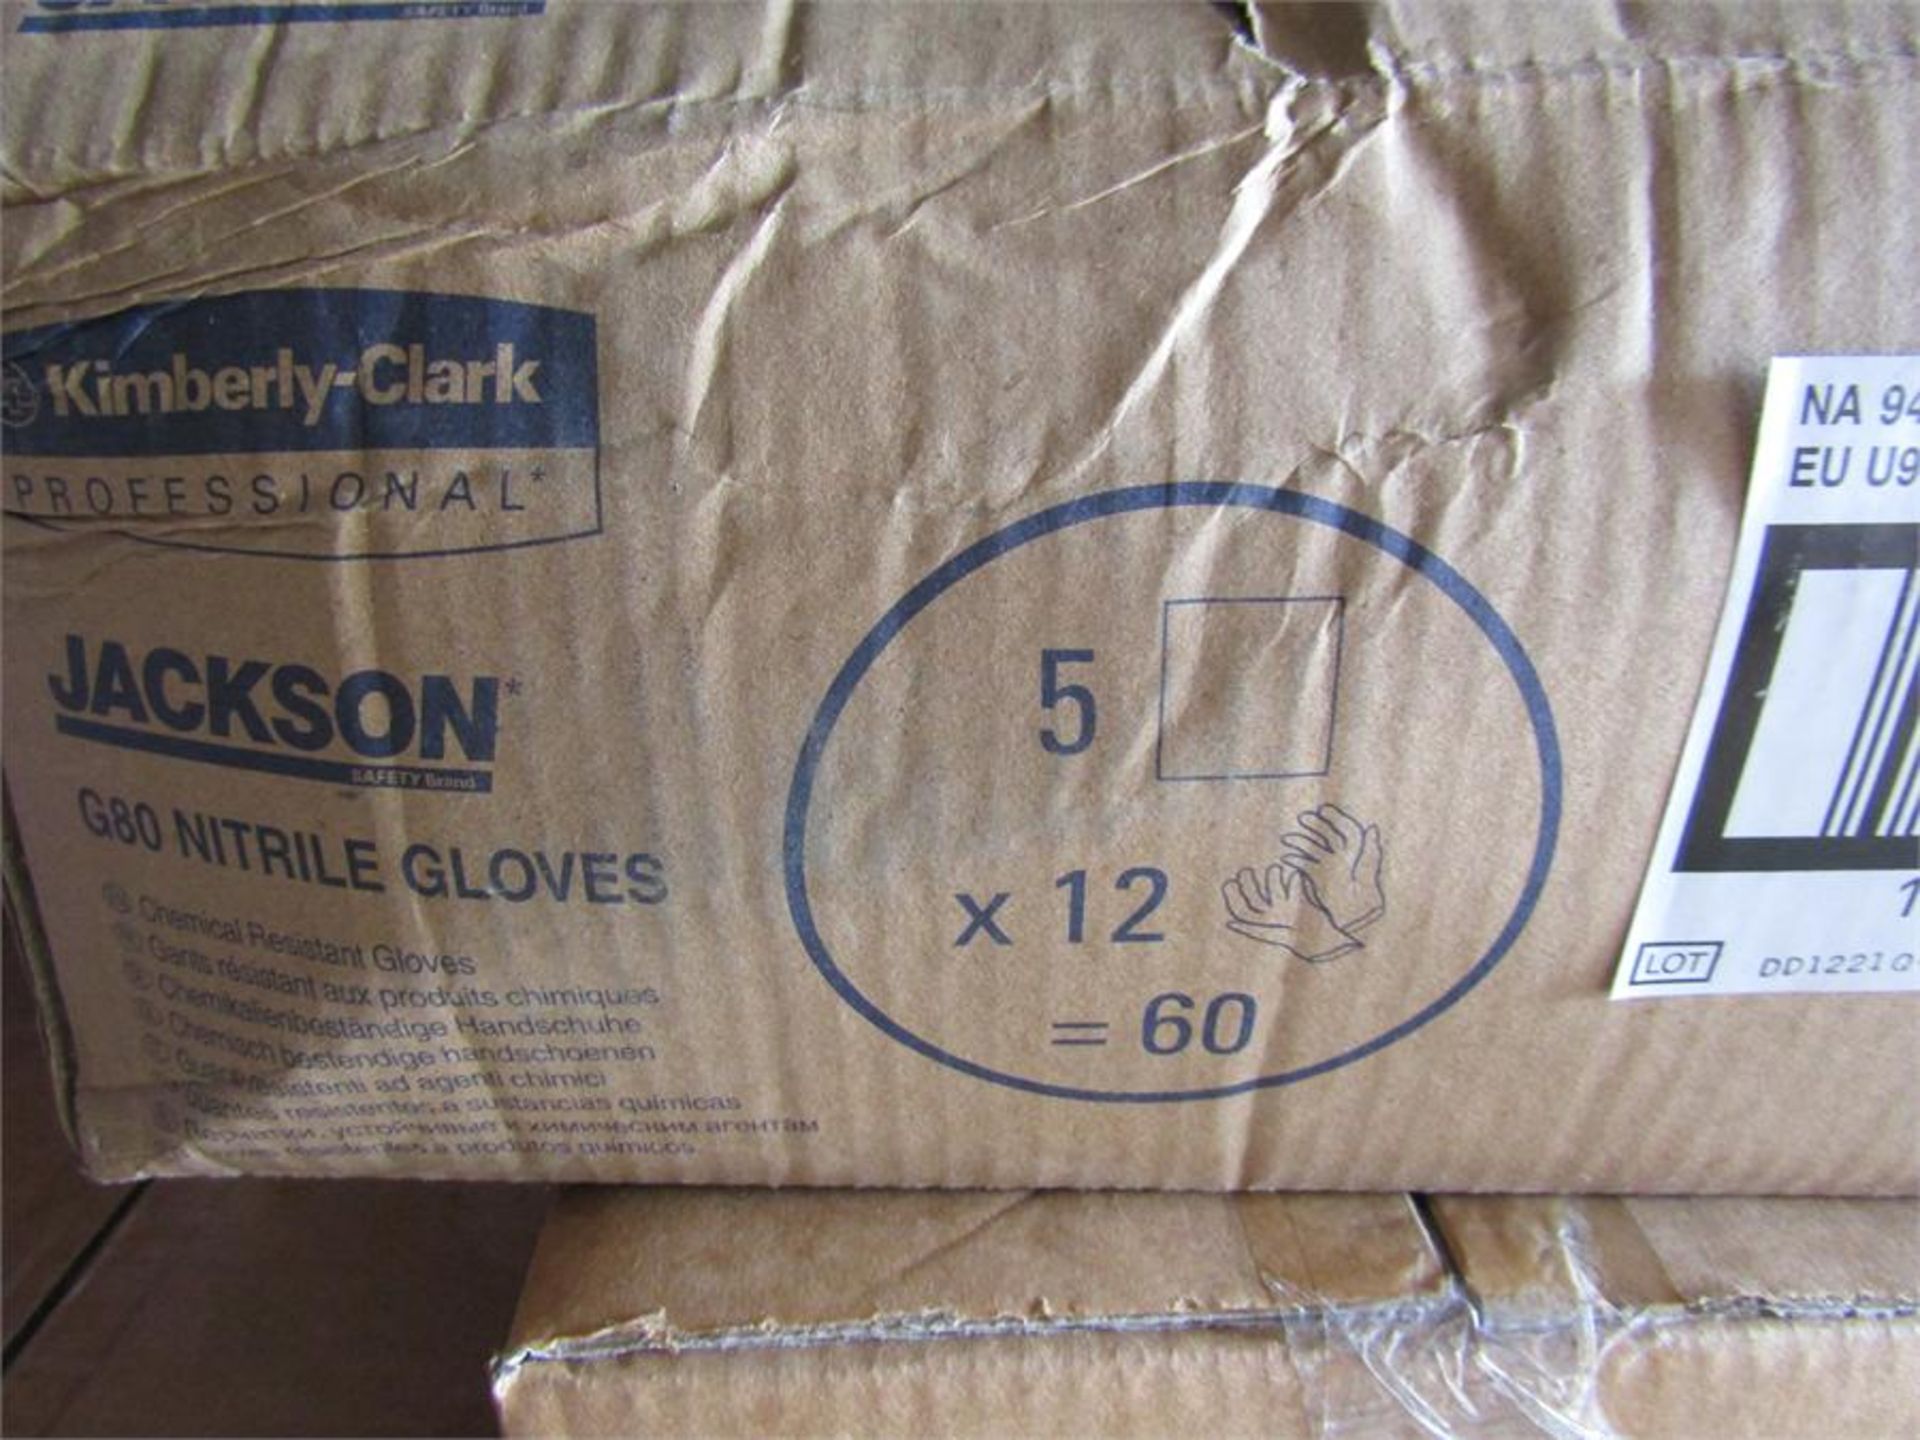 60 Pairs of JACKSON G80 NITRILE Chem Res Gloves - Image 2 of 3